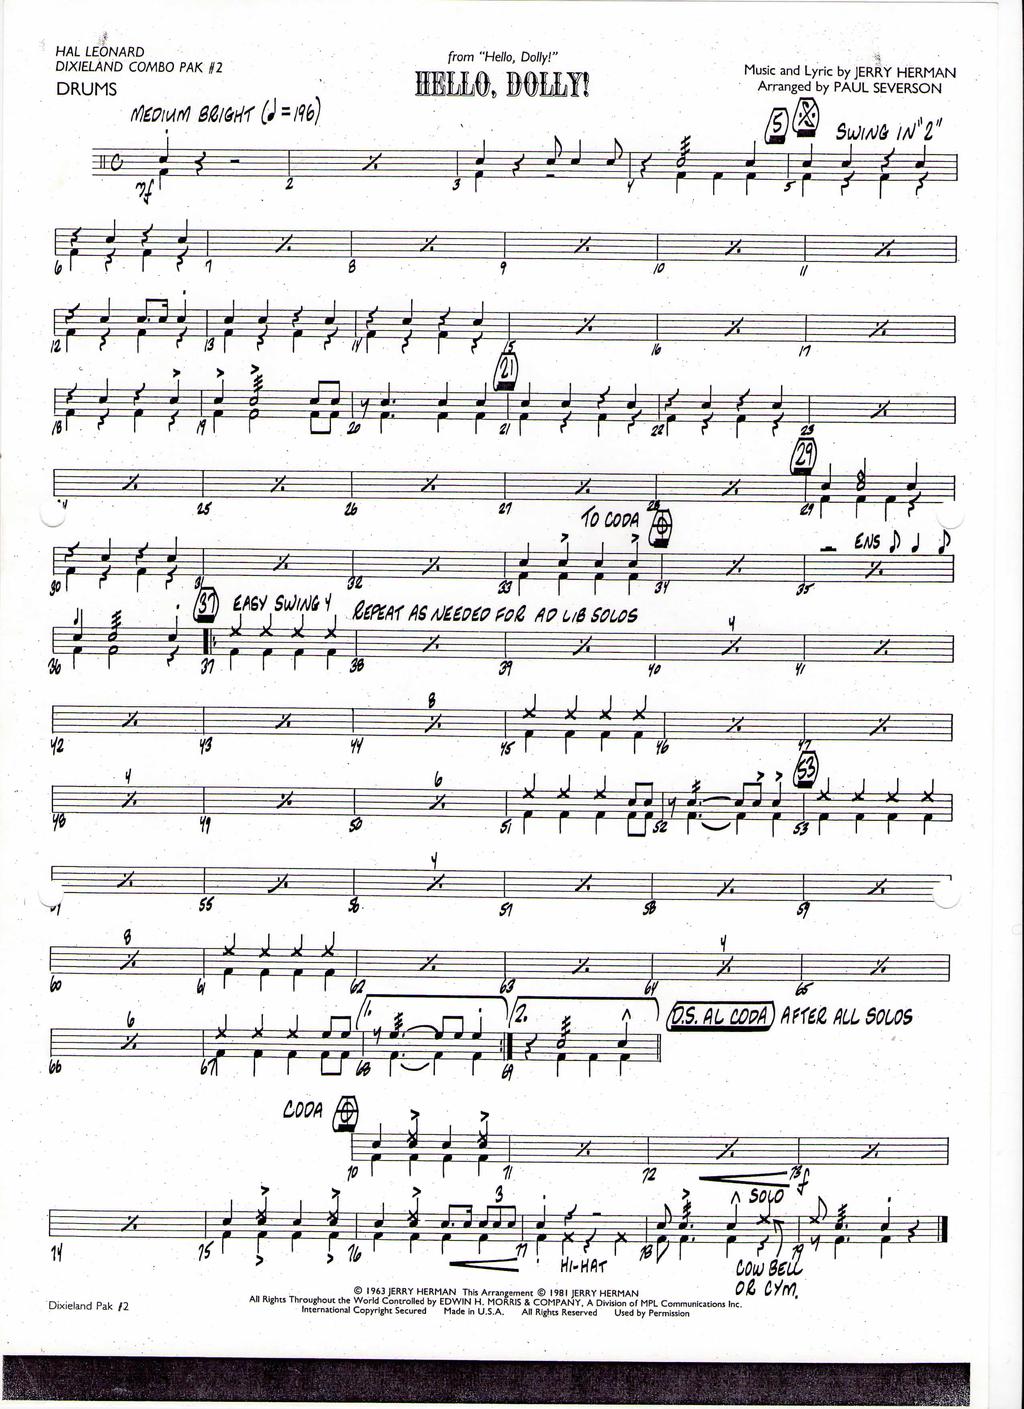 HAL LEONARD DIXÍELAND COMBO PAK. J2 DRUMS from "Helio, Dolly!" Music and Lyric by JERRY HERMÁN Arranged by PAUL SEVERSON *s 53 if r / r? rr 7 0 í' /f // r ± *s y _, s f r r \s r <r* l/.